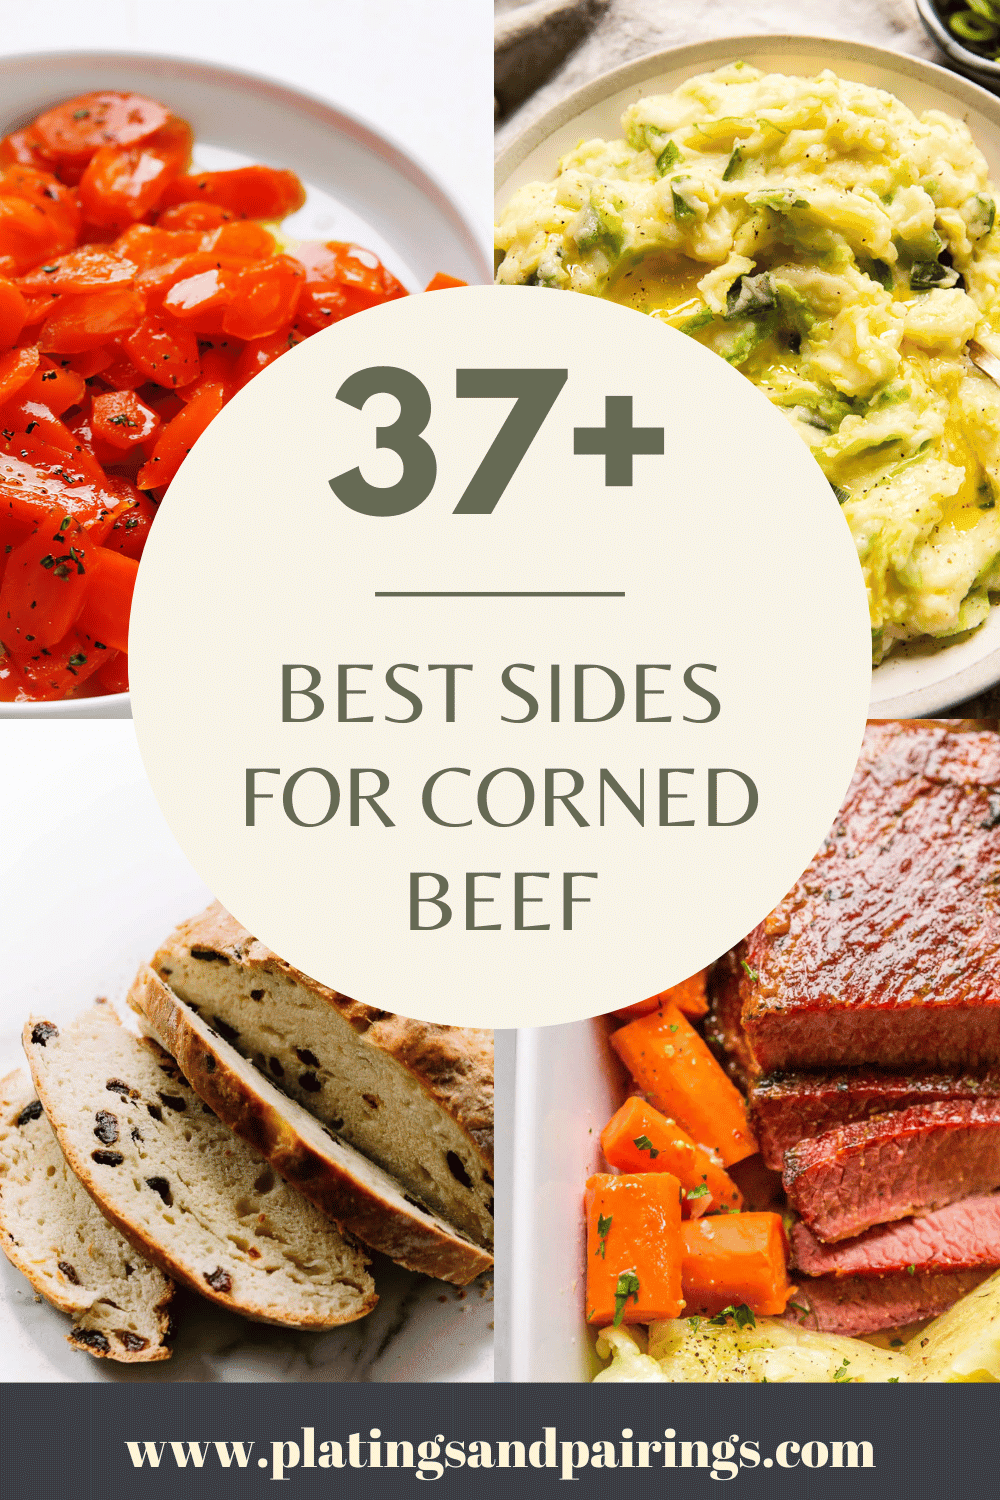 COLLAGE OF SIDES FOR CORNED BEEF WITH TEXT OVERLAY.